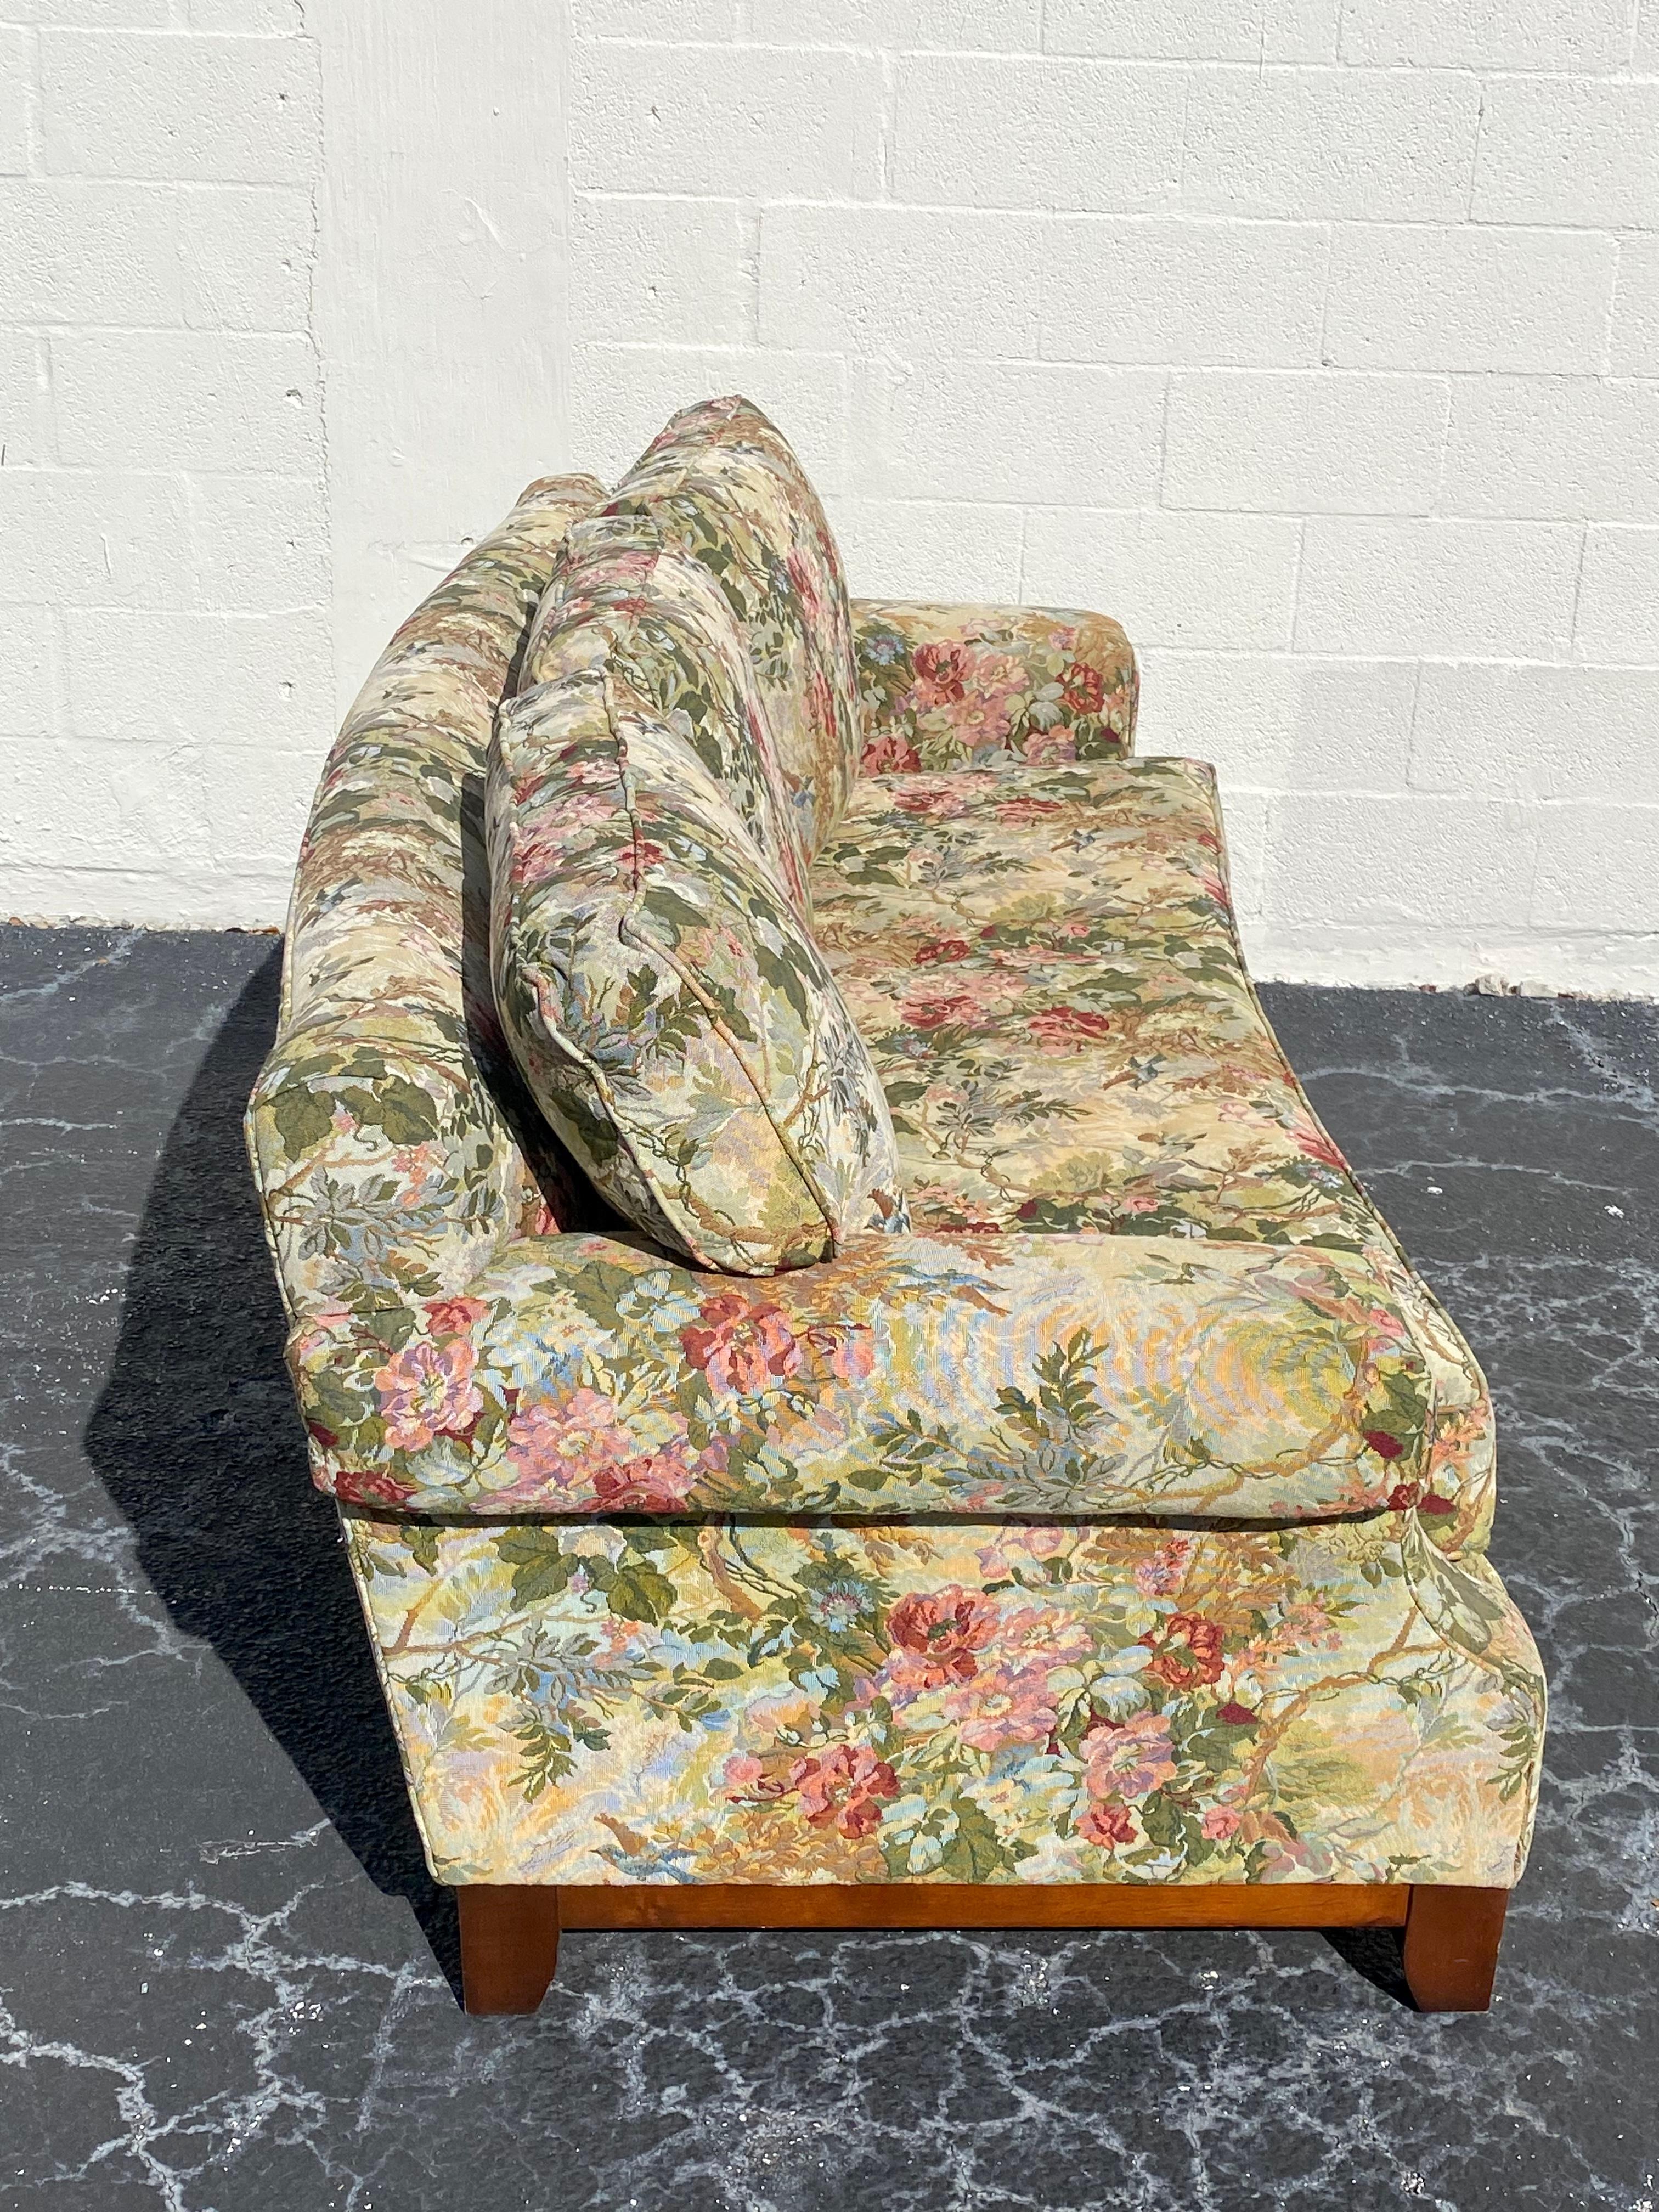 Contemporary Thomasville Curved Chinoiserie Chintz Floral Textile Down Sofa For Sale